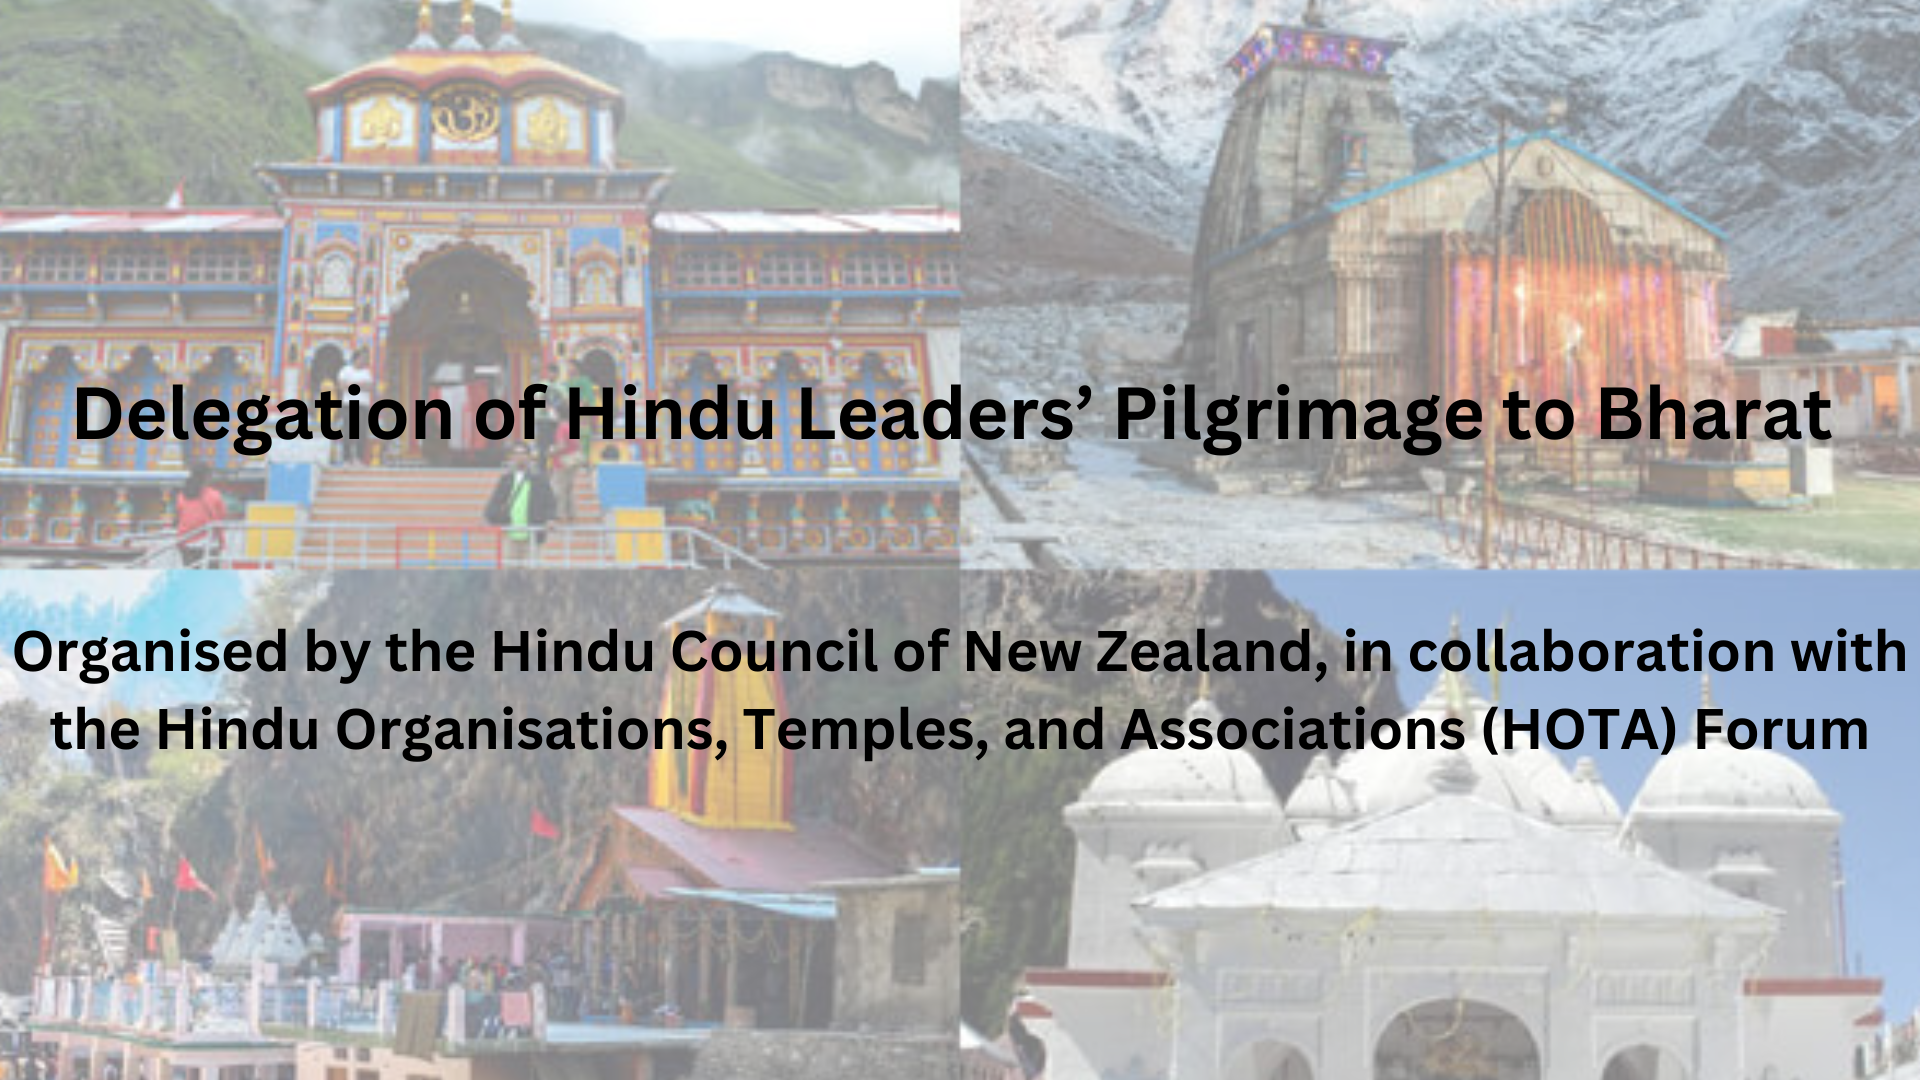 A Spiritual Journey: Hindu Leaders’ Pilgrimage to Bharat Organized by Hindu Council of New Zealand